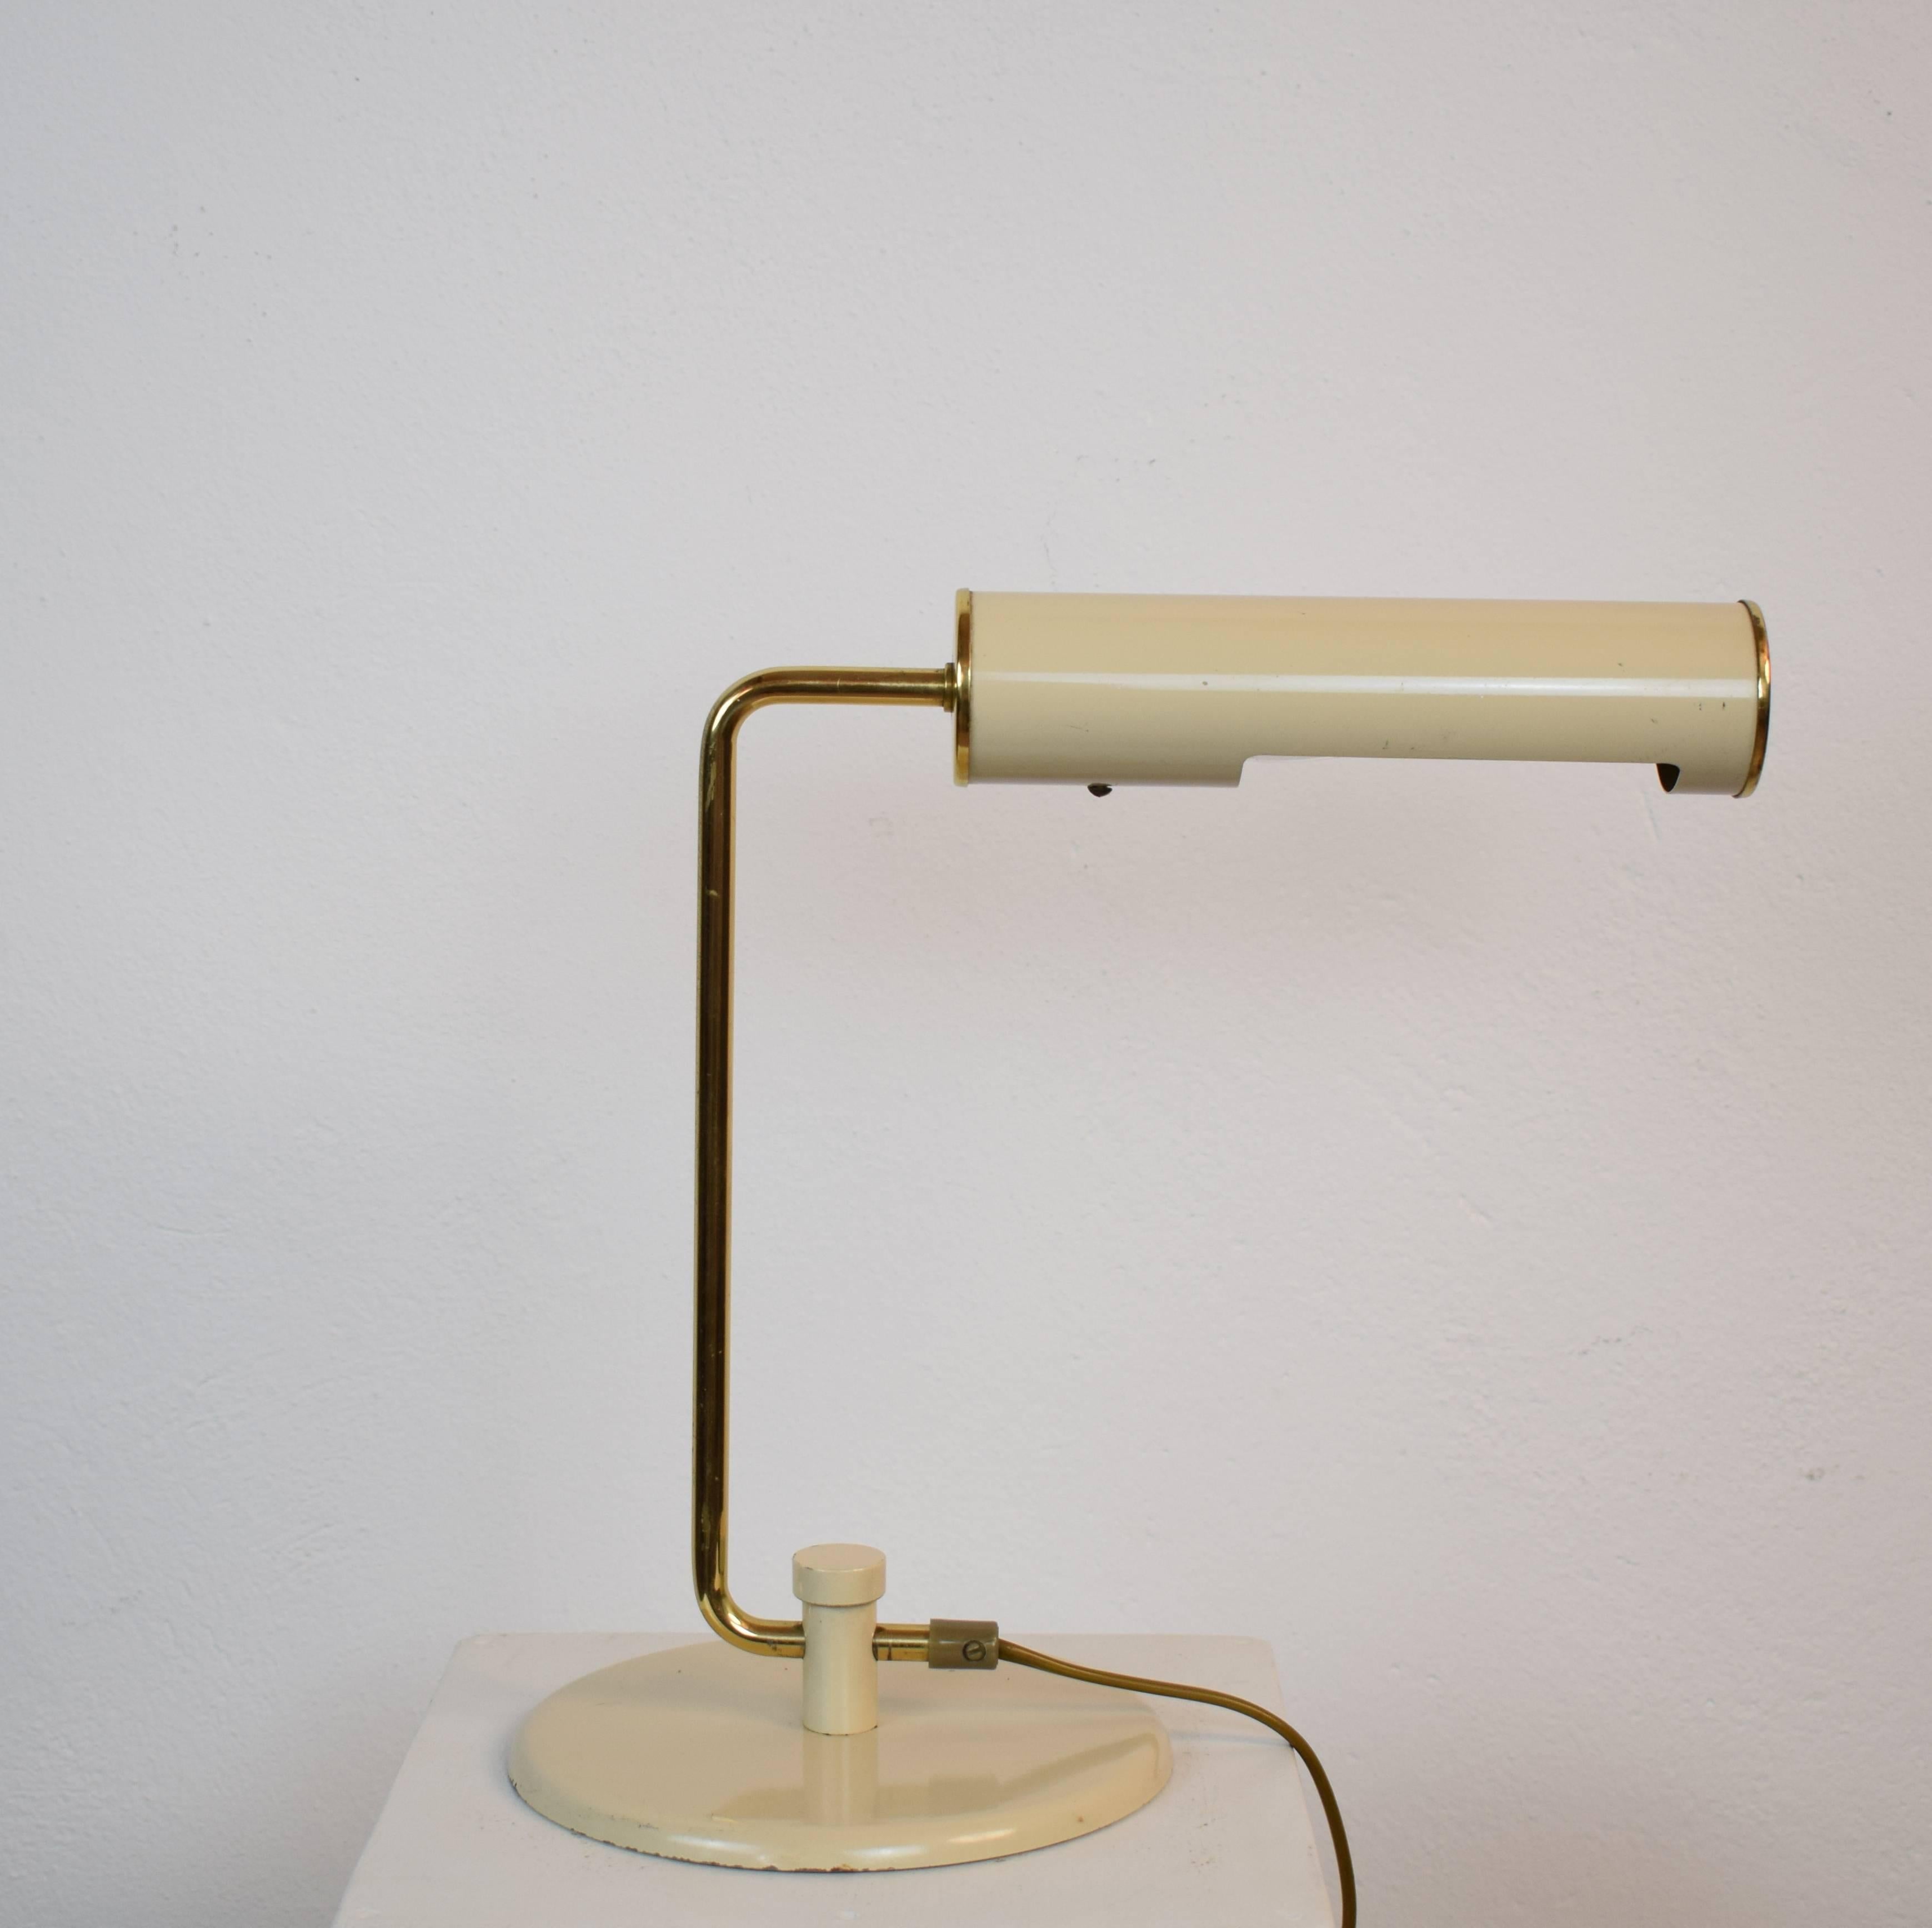 This brass and laquered metal table lamp with is from the 1970s and has a very elegant from.
The lamp is adjustable.
A great piece which also fits Mid-Century, modern and vintage interiors.